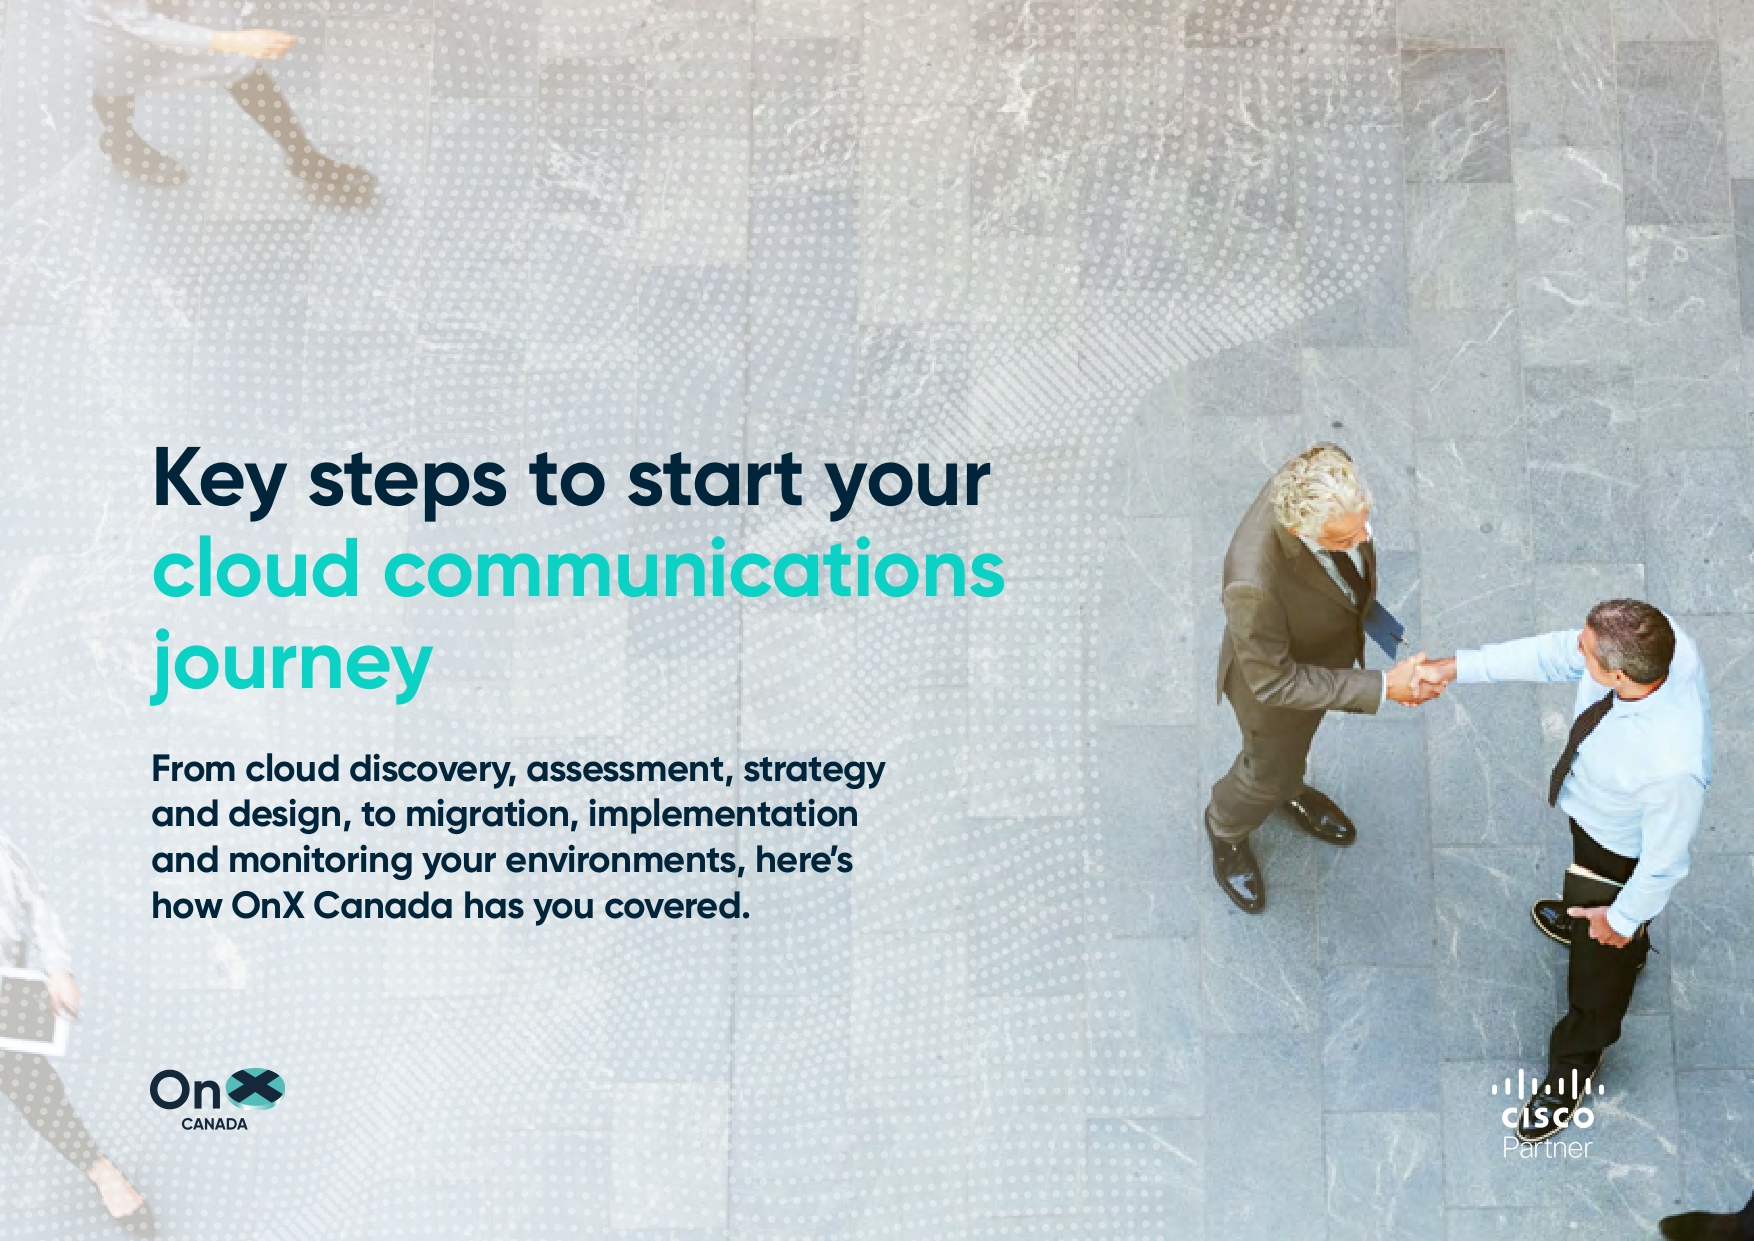 OnX_Canada_Key_steps_to_start_your_communications_cloud_journey_EBK_200611_page-0001-1